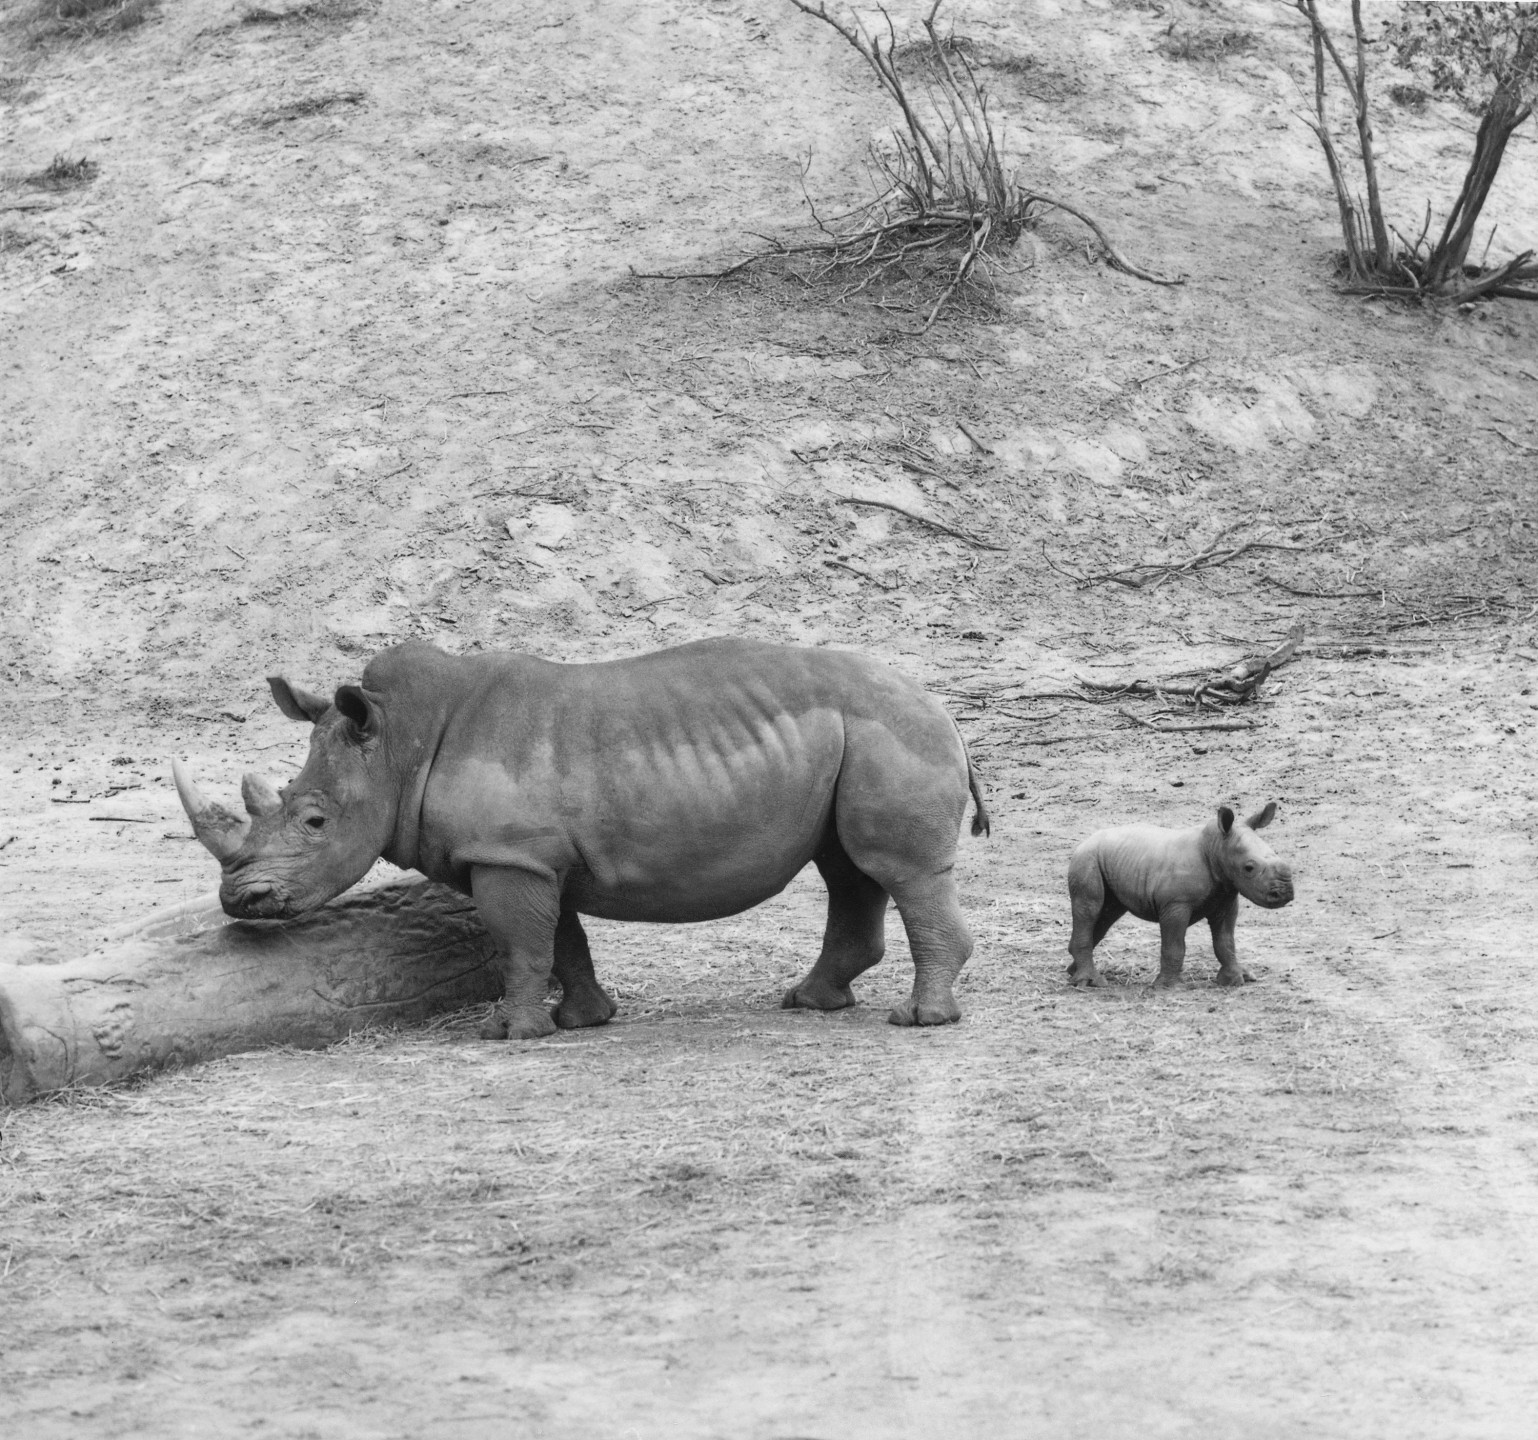 Zibulo's mother was Uhtandi, one of the rhinos that came from South Africa, and his father was Mandhla—the male southern white rhino that had lived at the Zoo since the 1960s with female Tombasan without ever reproducing! Finding out that white rhinos needed a herd to stimulate breeding was one of the early discoveries of the Park's white rhino program.


























